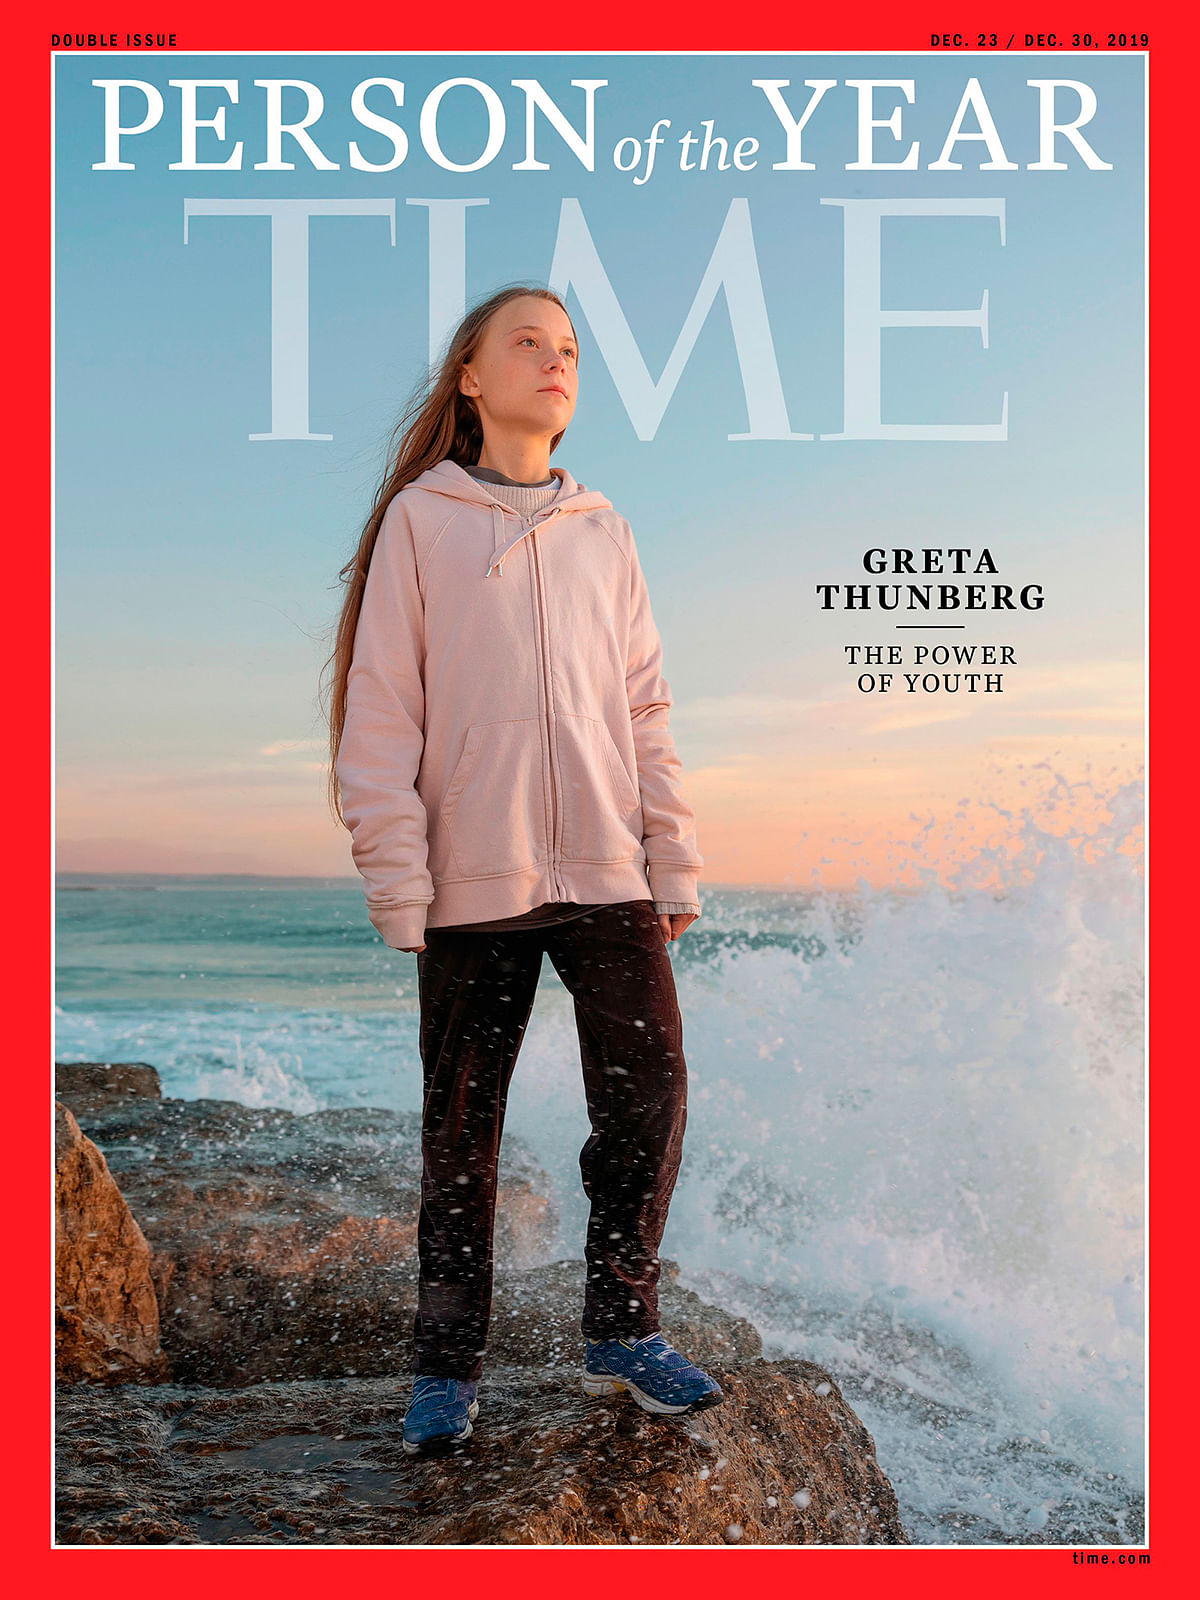 This handout image released on December 11, 2019 courtesy of Time shows the Time person of the Year December 23/December 30, 2019 cover with Greta Thunberg.